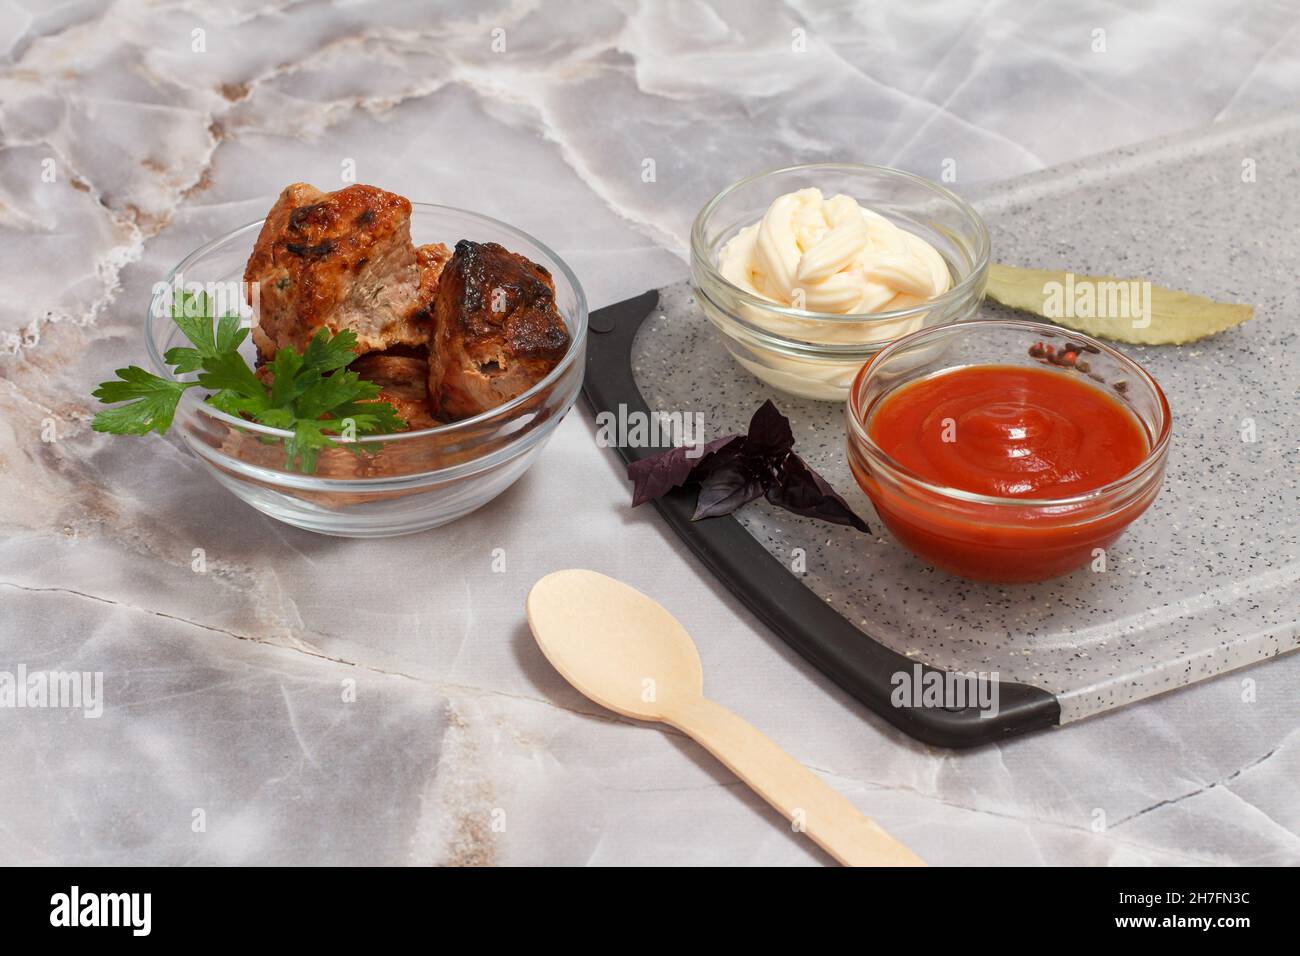 Grilled pork in a glass bowl with fresh basil. Porcelain bowls with ketchup and cheese sauce on the cutting board. Top view. Stock Photo